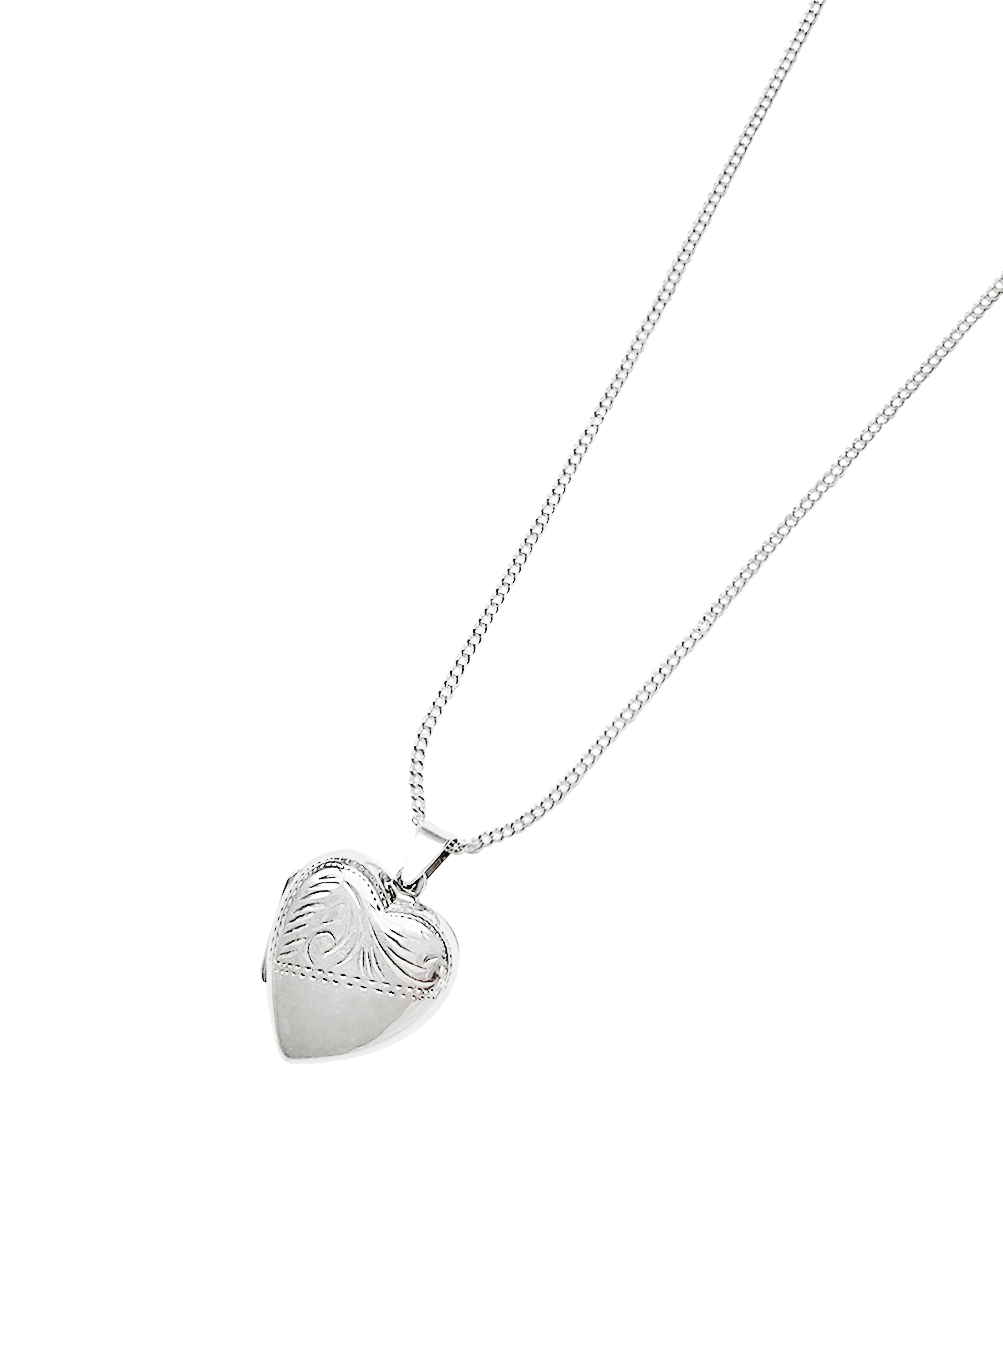 Opening heart necklace